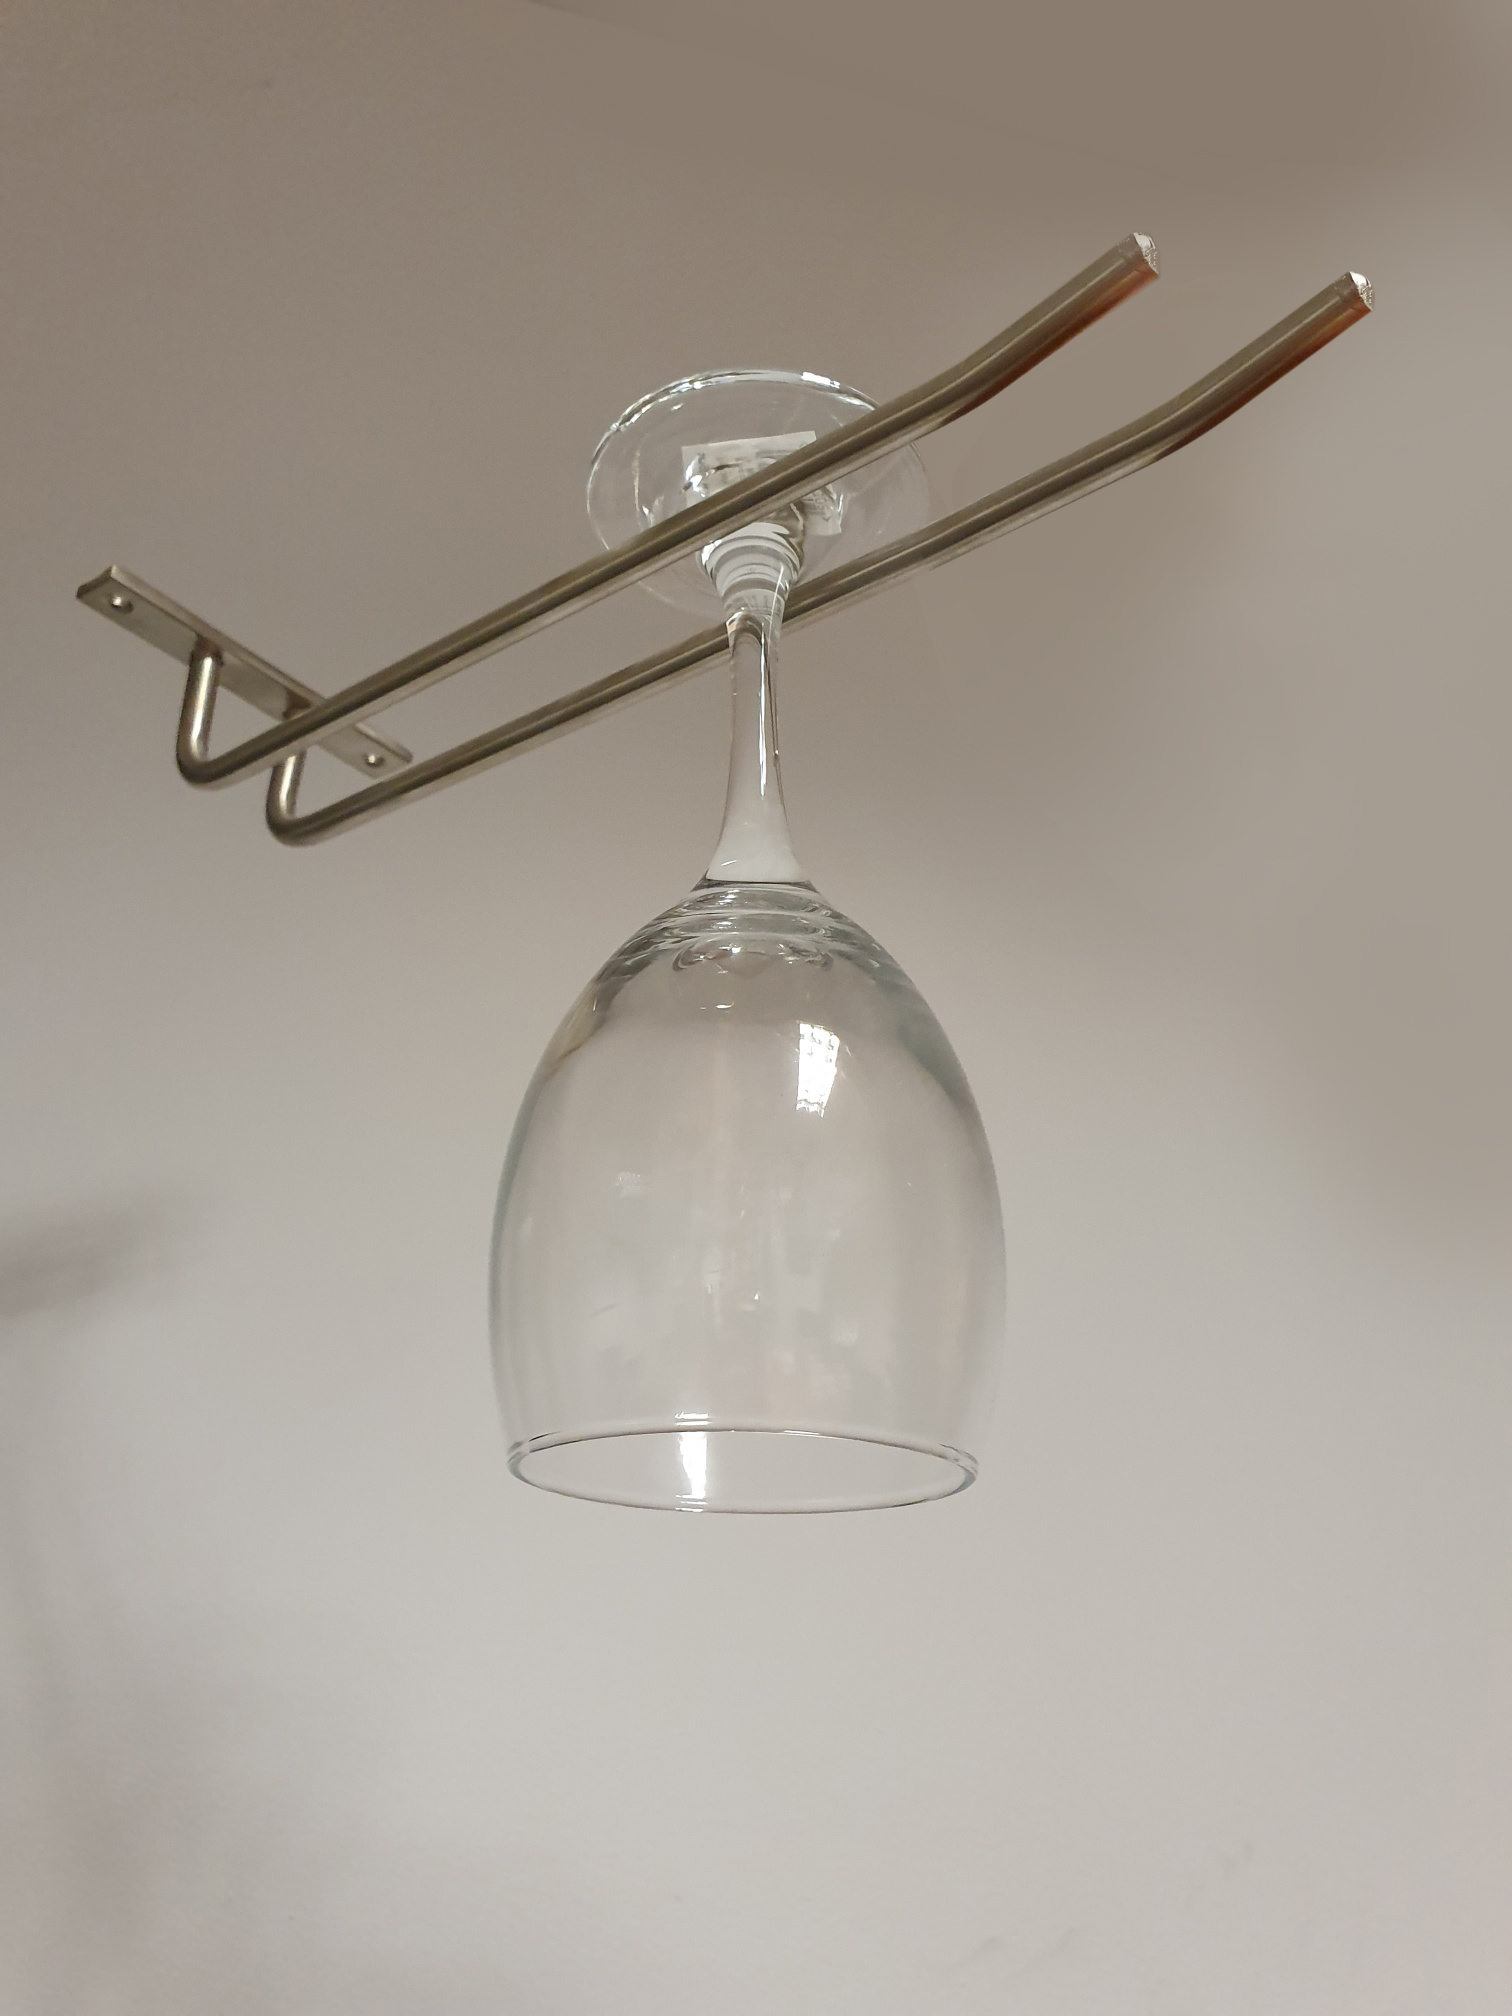 Ceiling Mounted Wine Glass Prongs